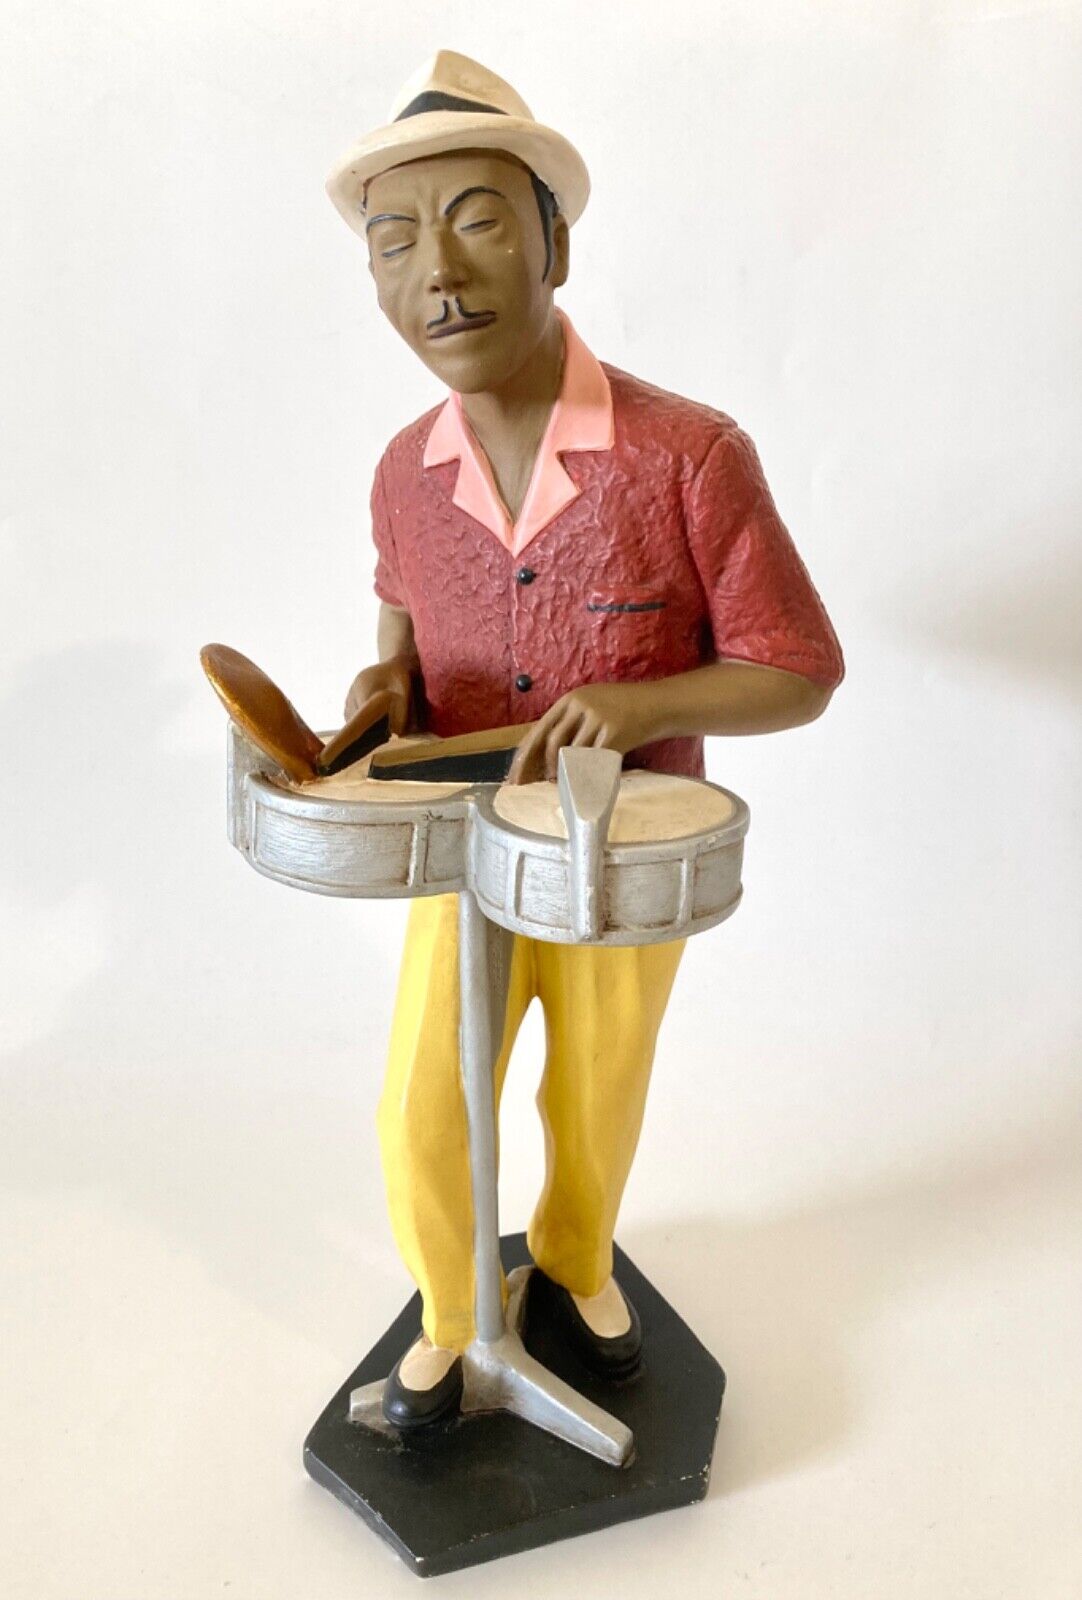 Vtg Collectable Drum Player Apparence Paris Enesco 12” Resin Statue Jazz Classic